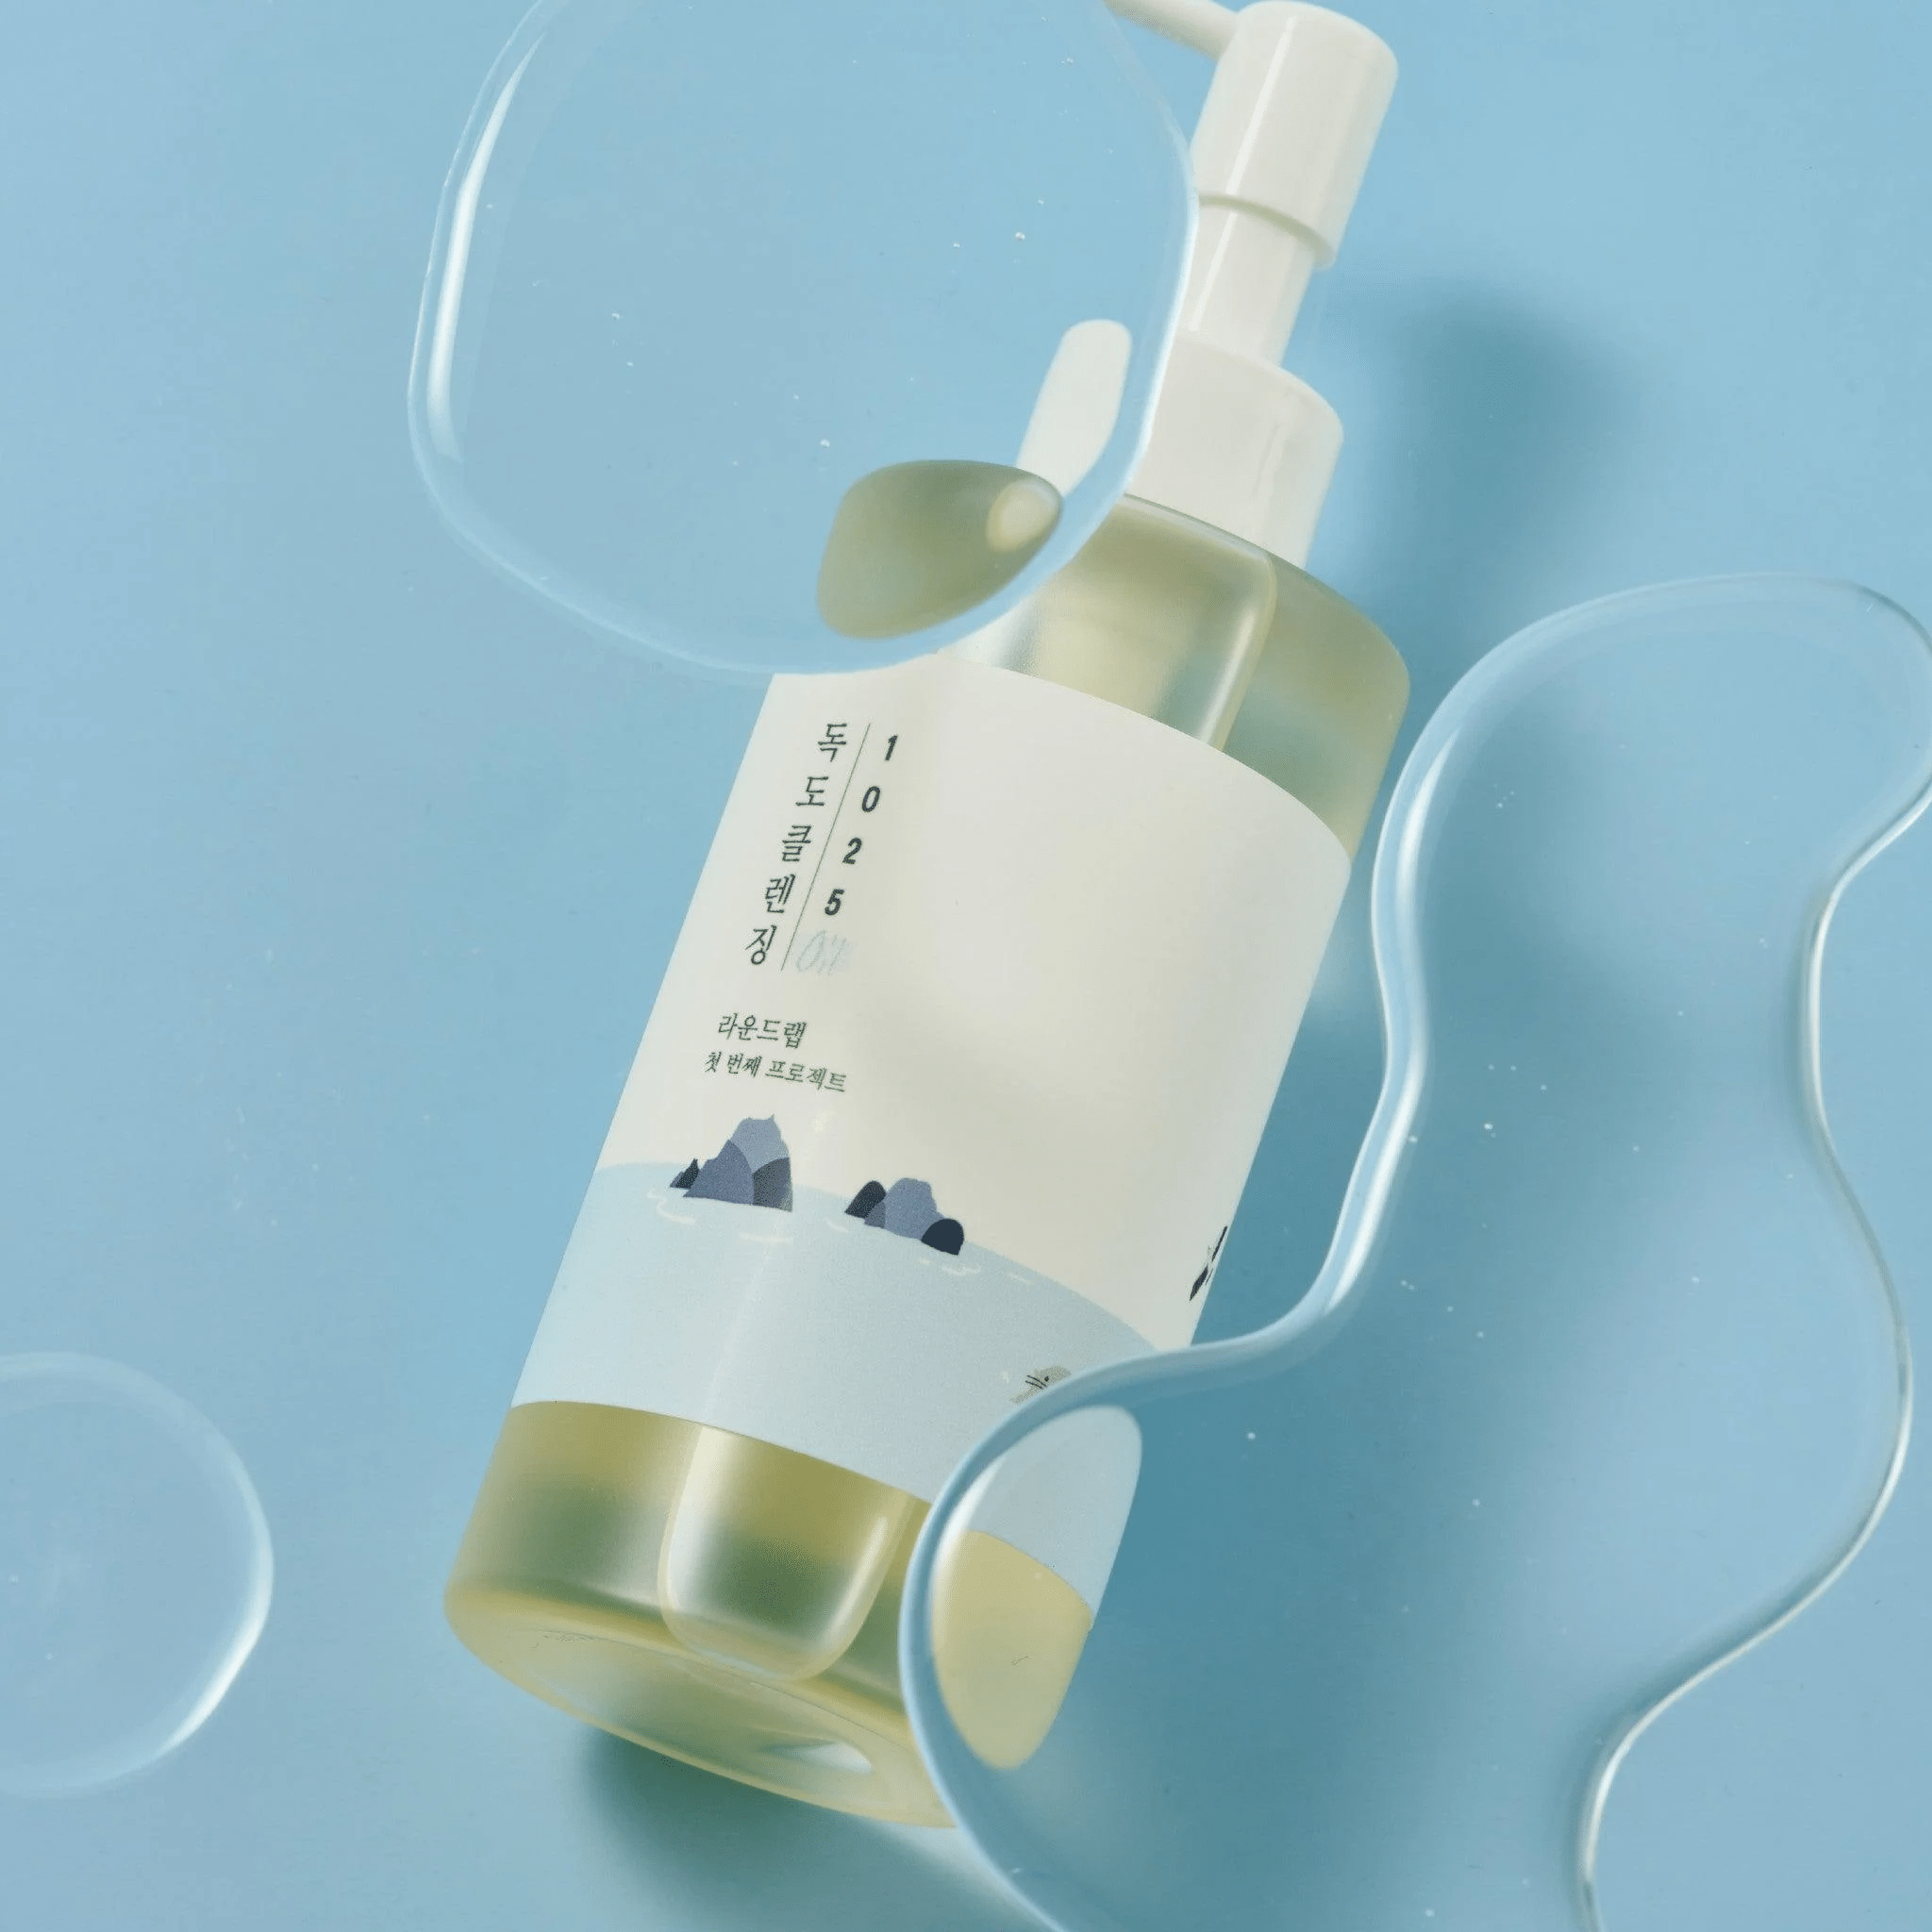 skincare-kbeauty-glowtime-round lab 1025 dokdo cleansing oil